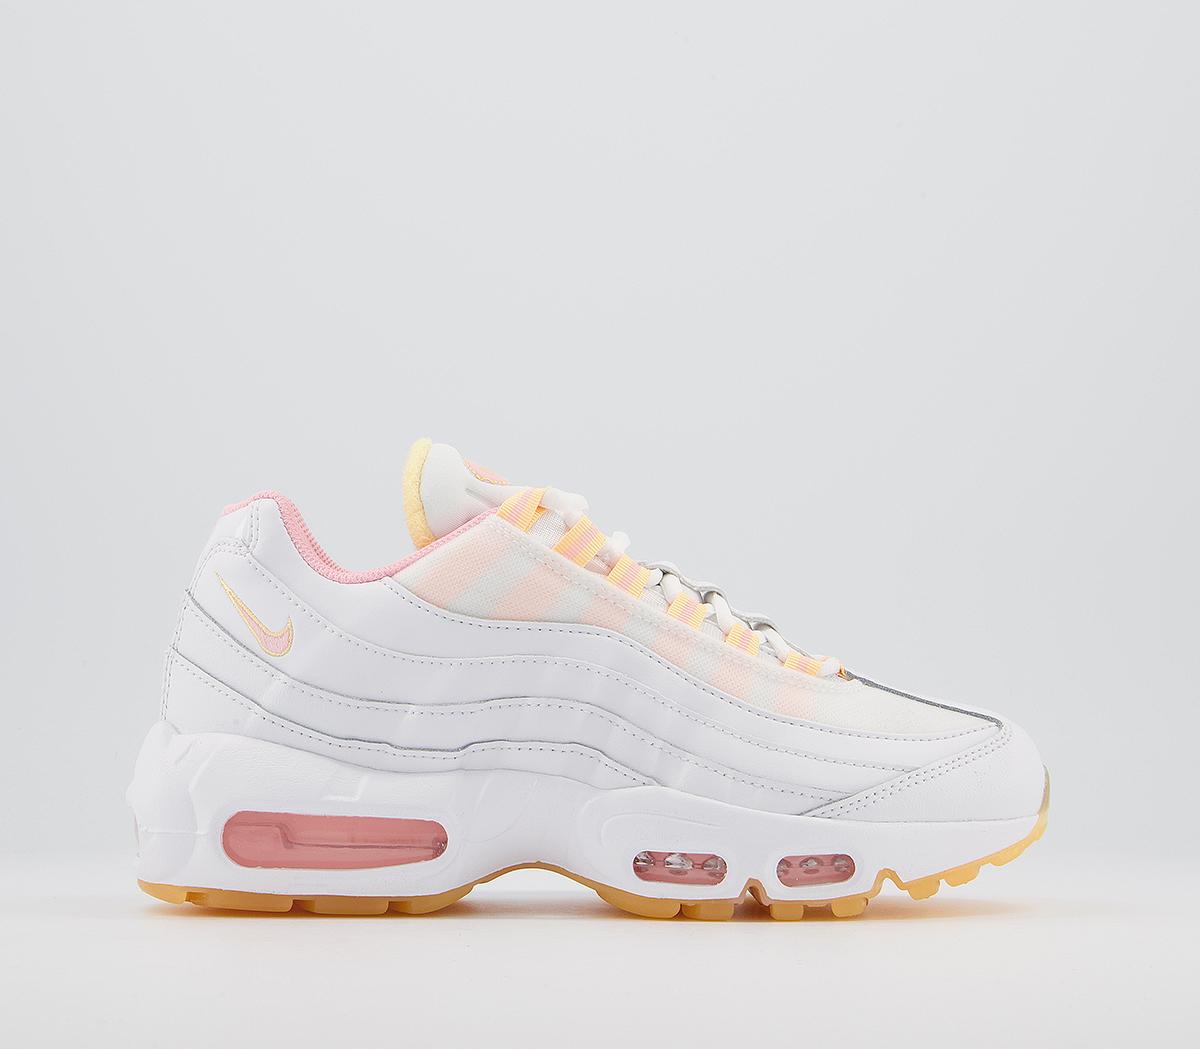 NikeAir Max 95 TrainersWhite Artic Punch Melon Tint